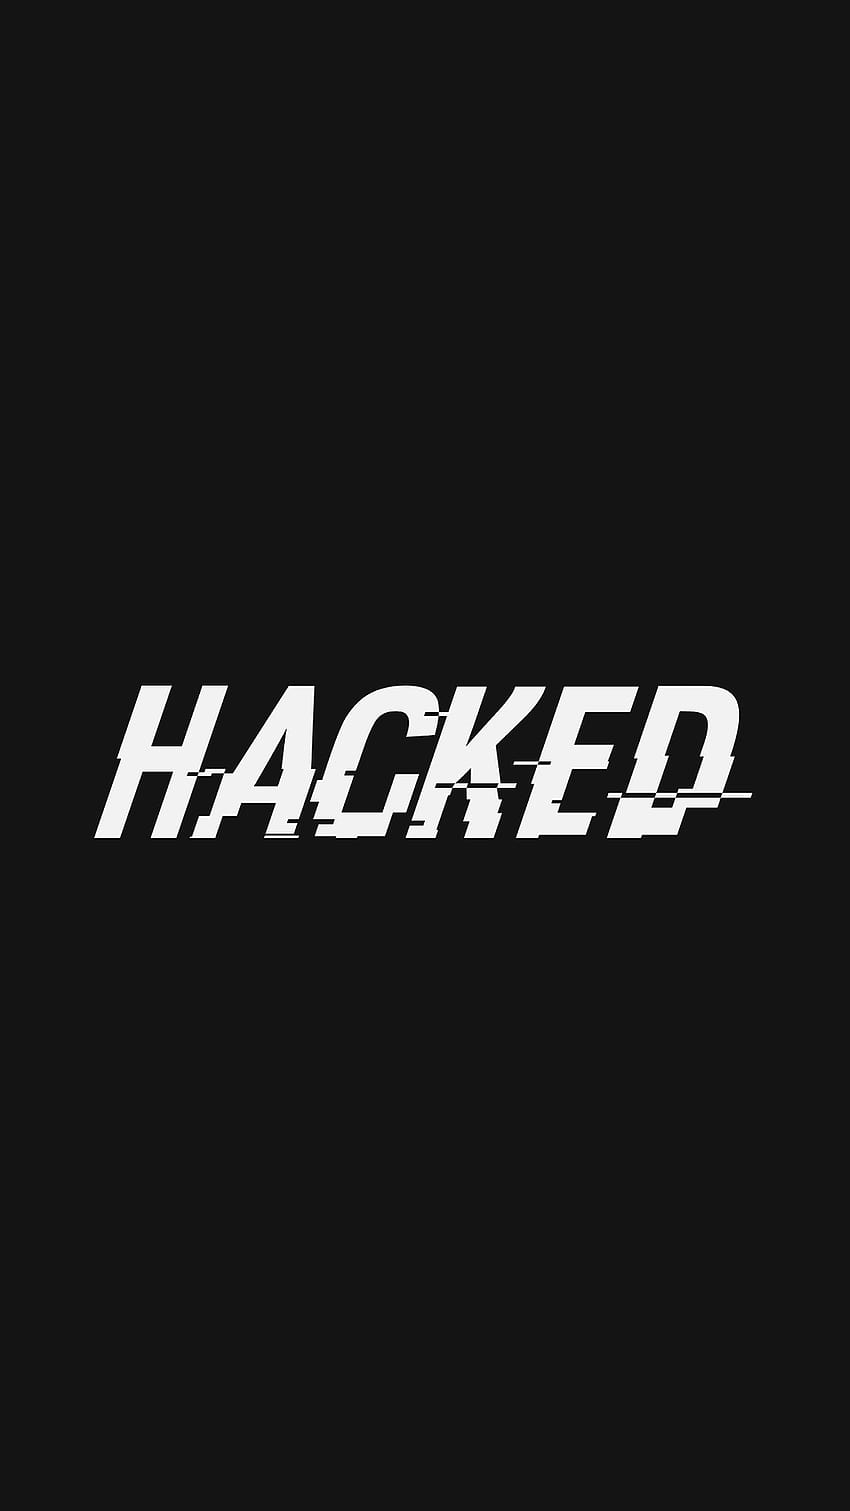 Hacked IPhone, security breach iphone HD phone wallpaper